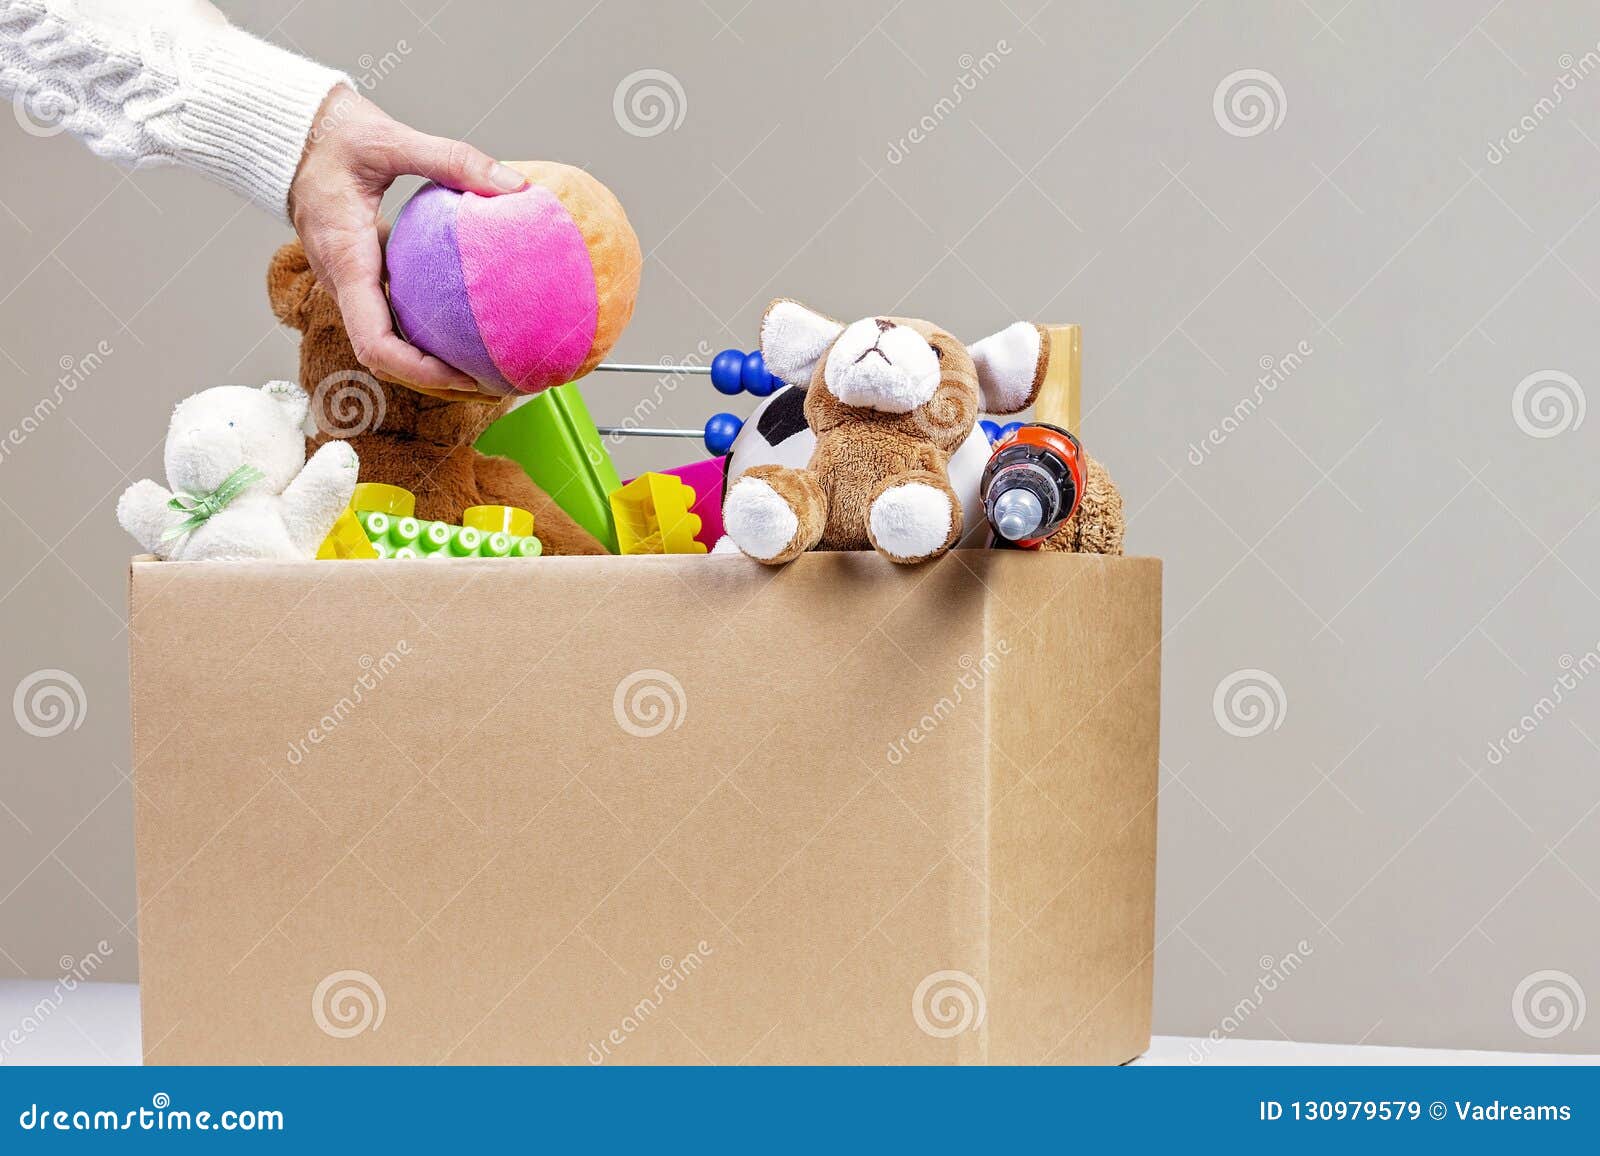 Download Donation Concept. Woman Collecting Donation Box With Clothes, Toys And Books Stock Image - Image ...